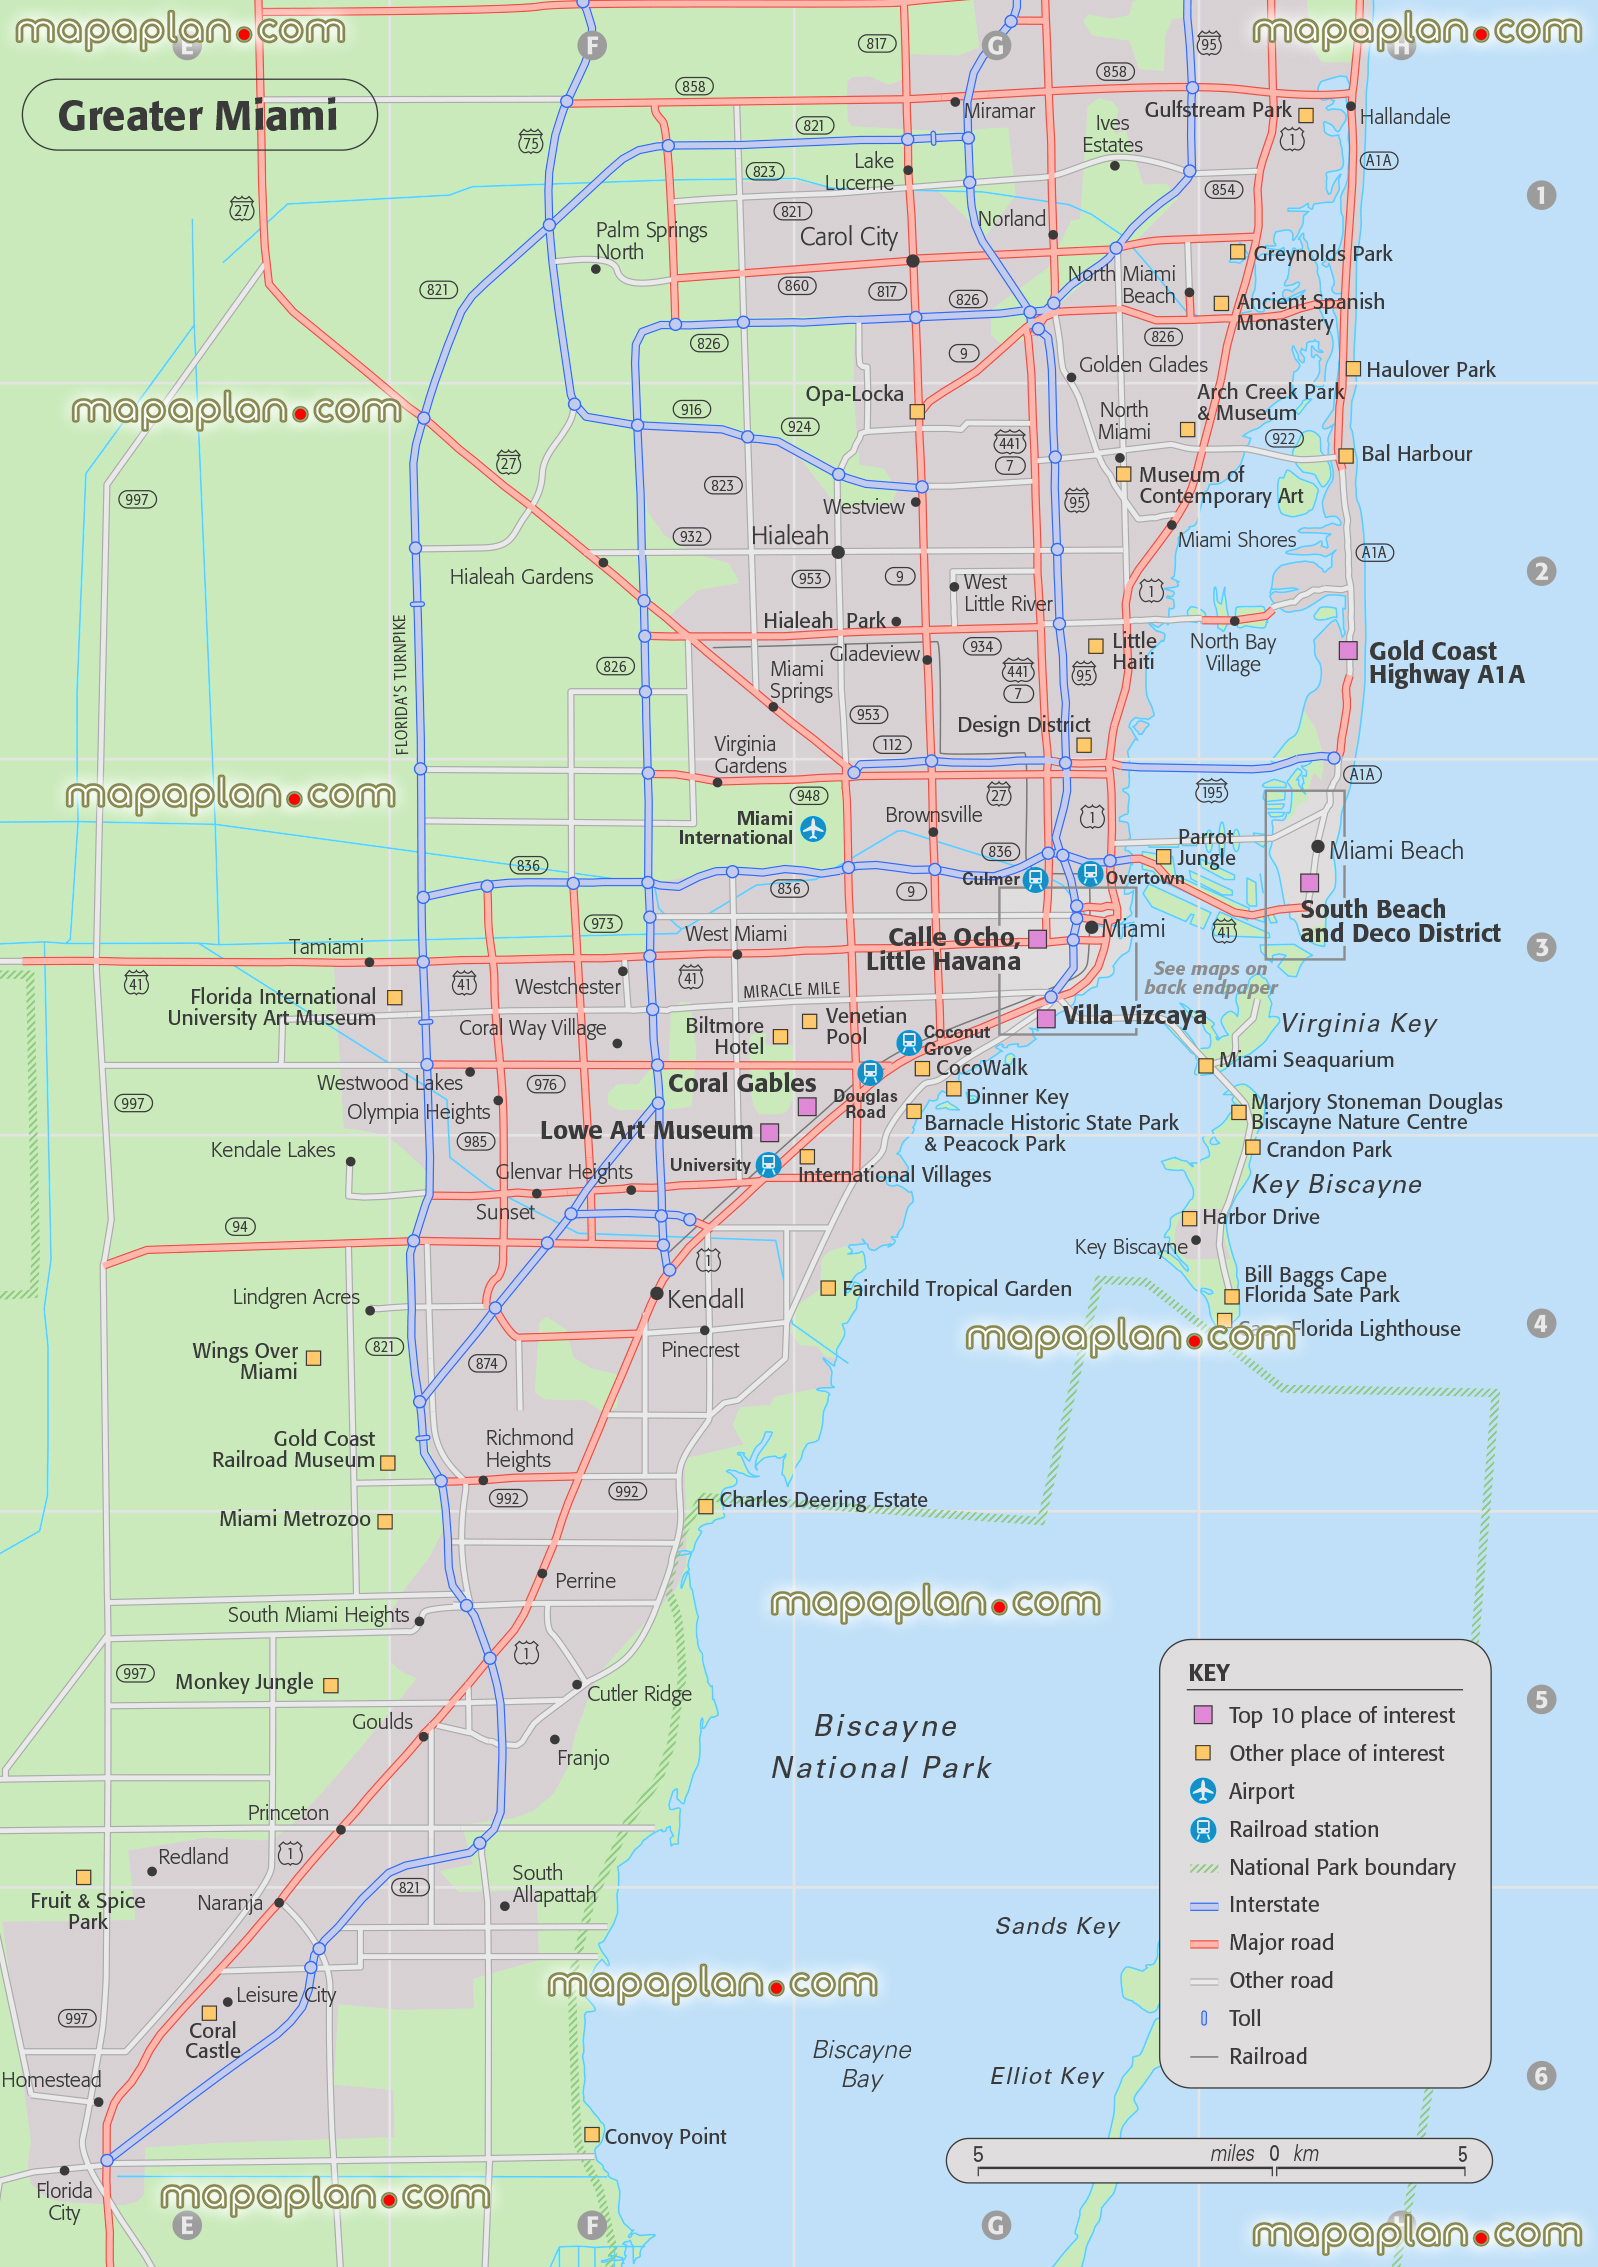 greater Miami locations top 10 places interests mia Miami international airport rail stations railroads detailed distances between cities towns villages suburbs metropolitan areas interactive itinerary planner top sights visit